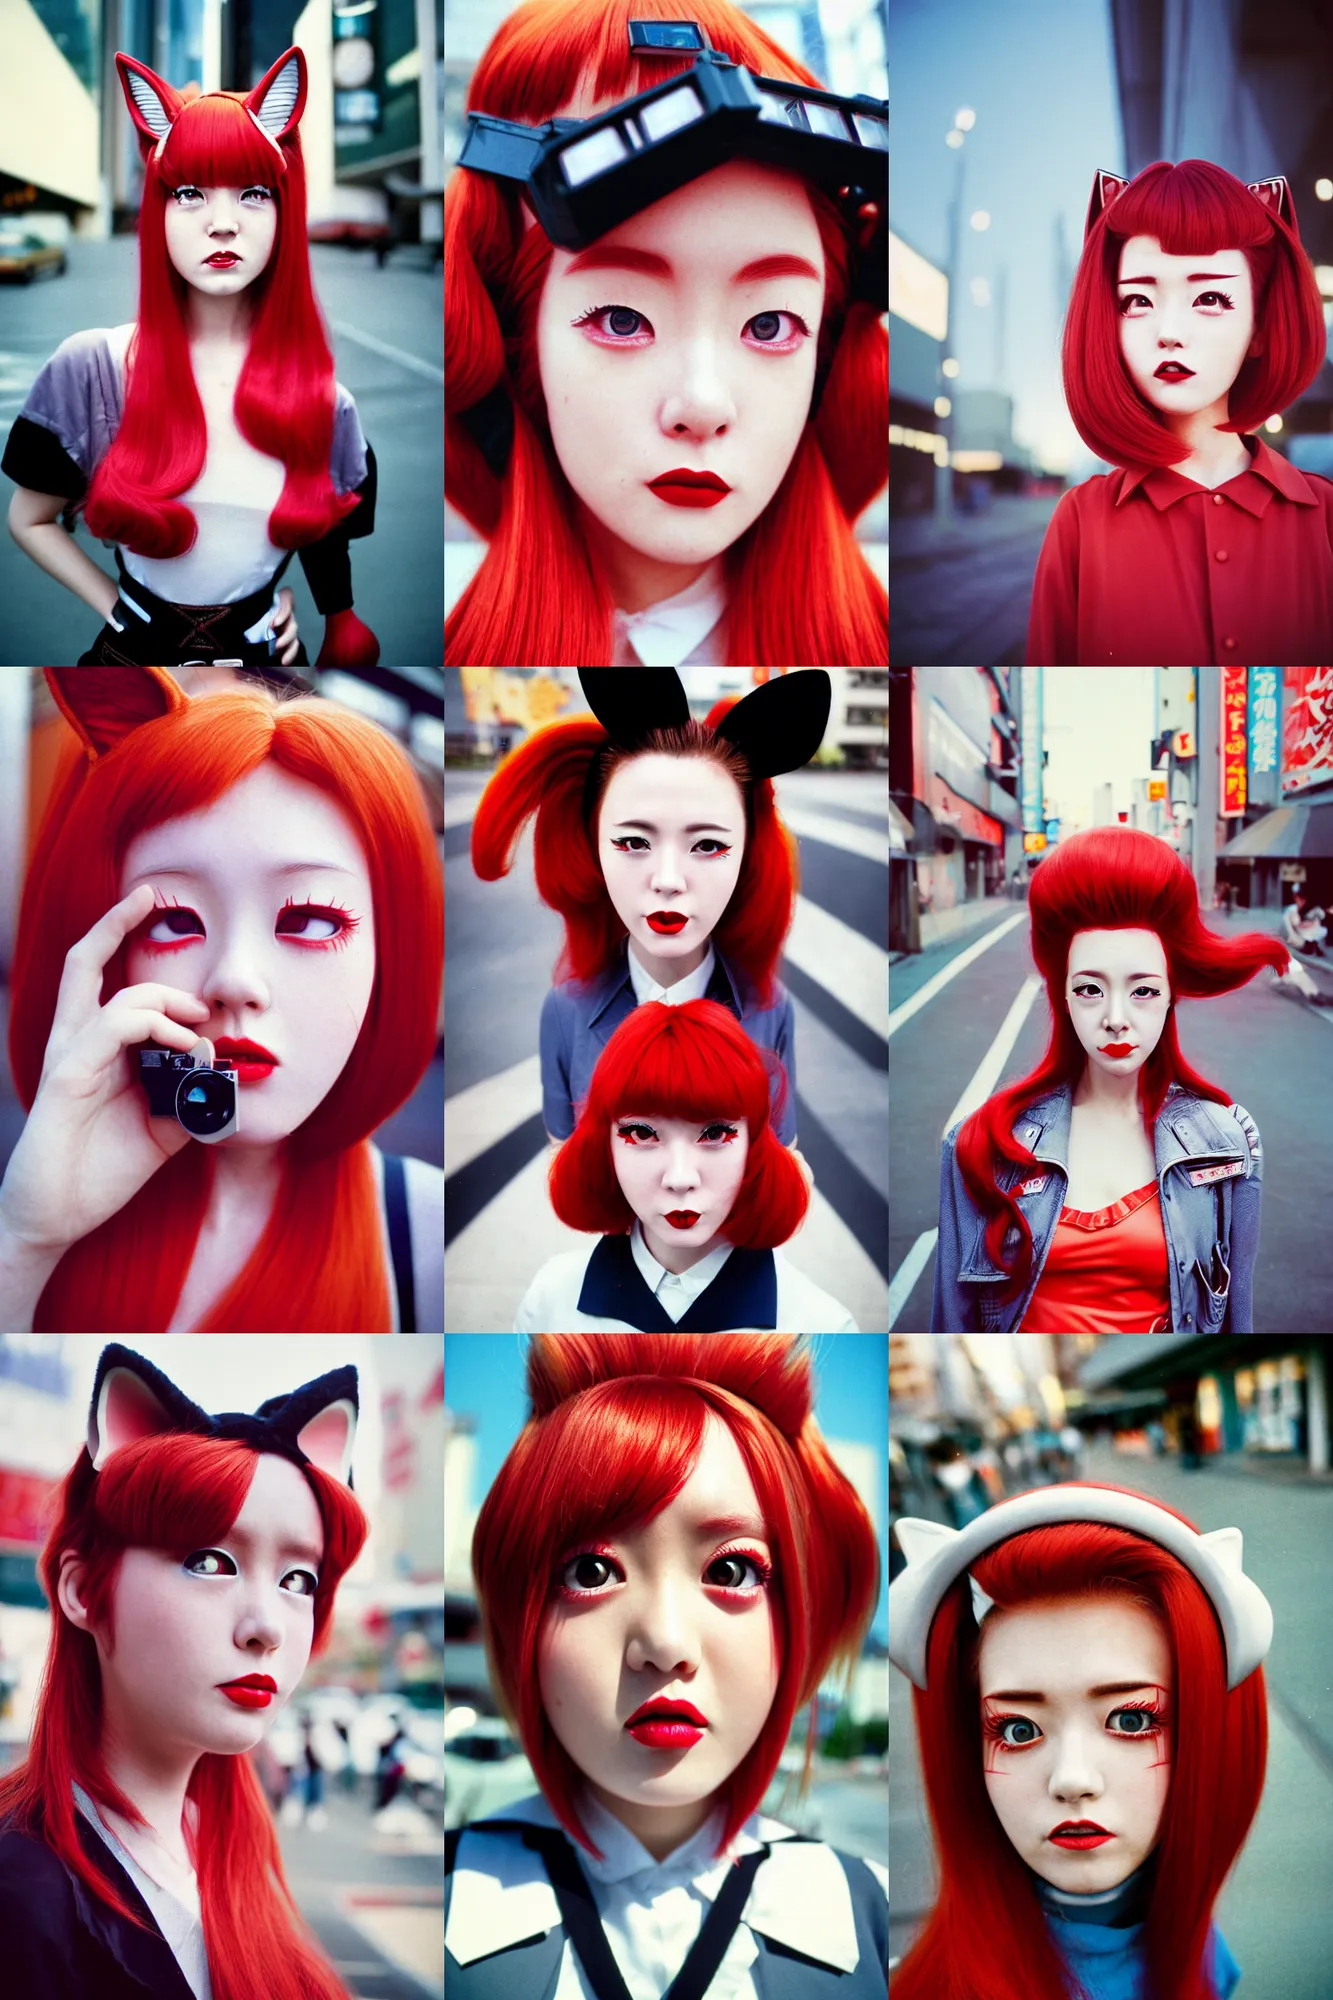 Prompt: Kodak portra 400,8K,highly detailed: beautiful three point perspective extreme closeup portrait photo in style of 1980s frontiers in cosplay retrofuturism tokyo seinen manga street photography fashion edition, highly detailed, focus on pursed lips;red hair;fox ears, eye contact, mirror background, soft lighting